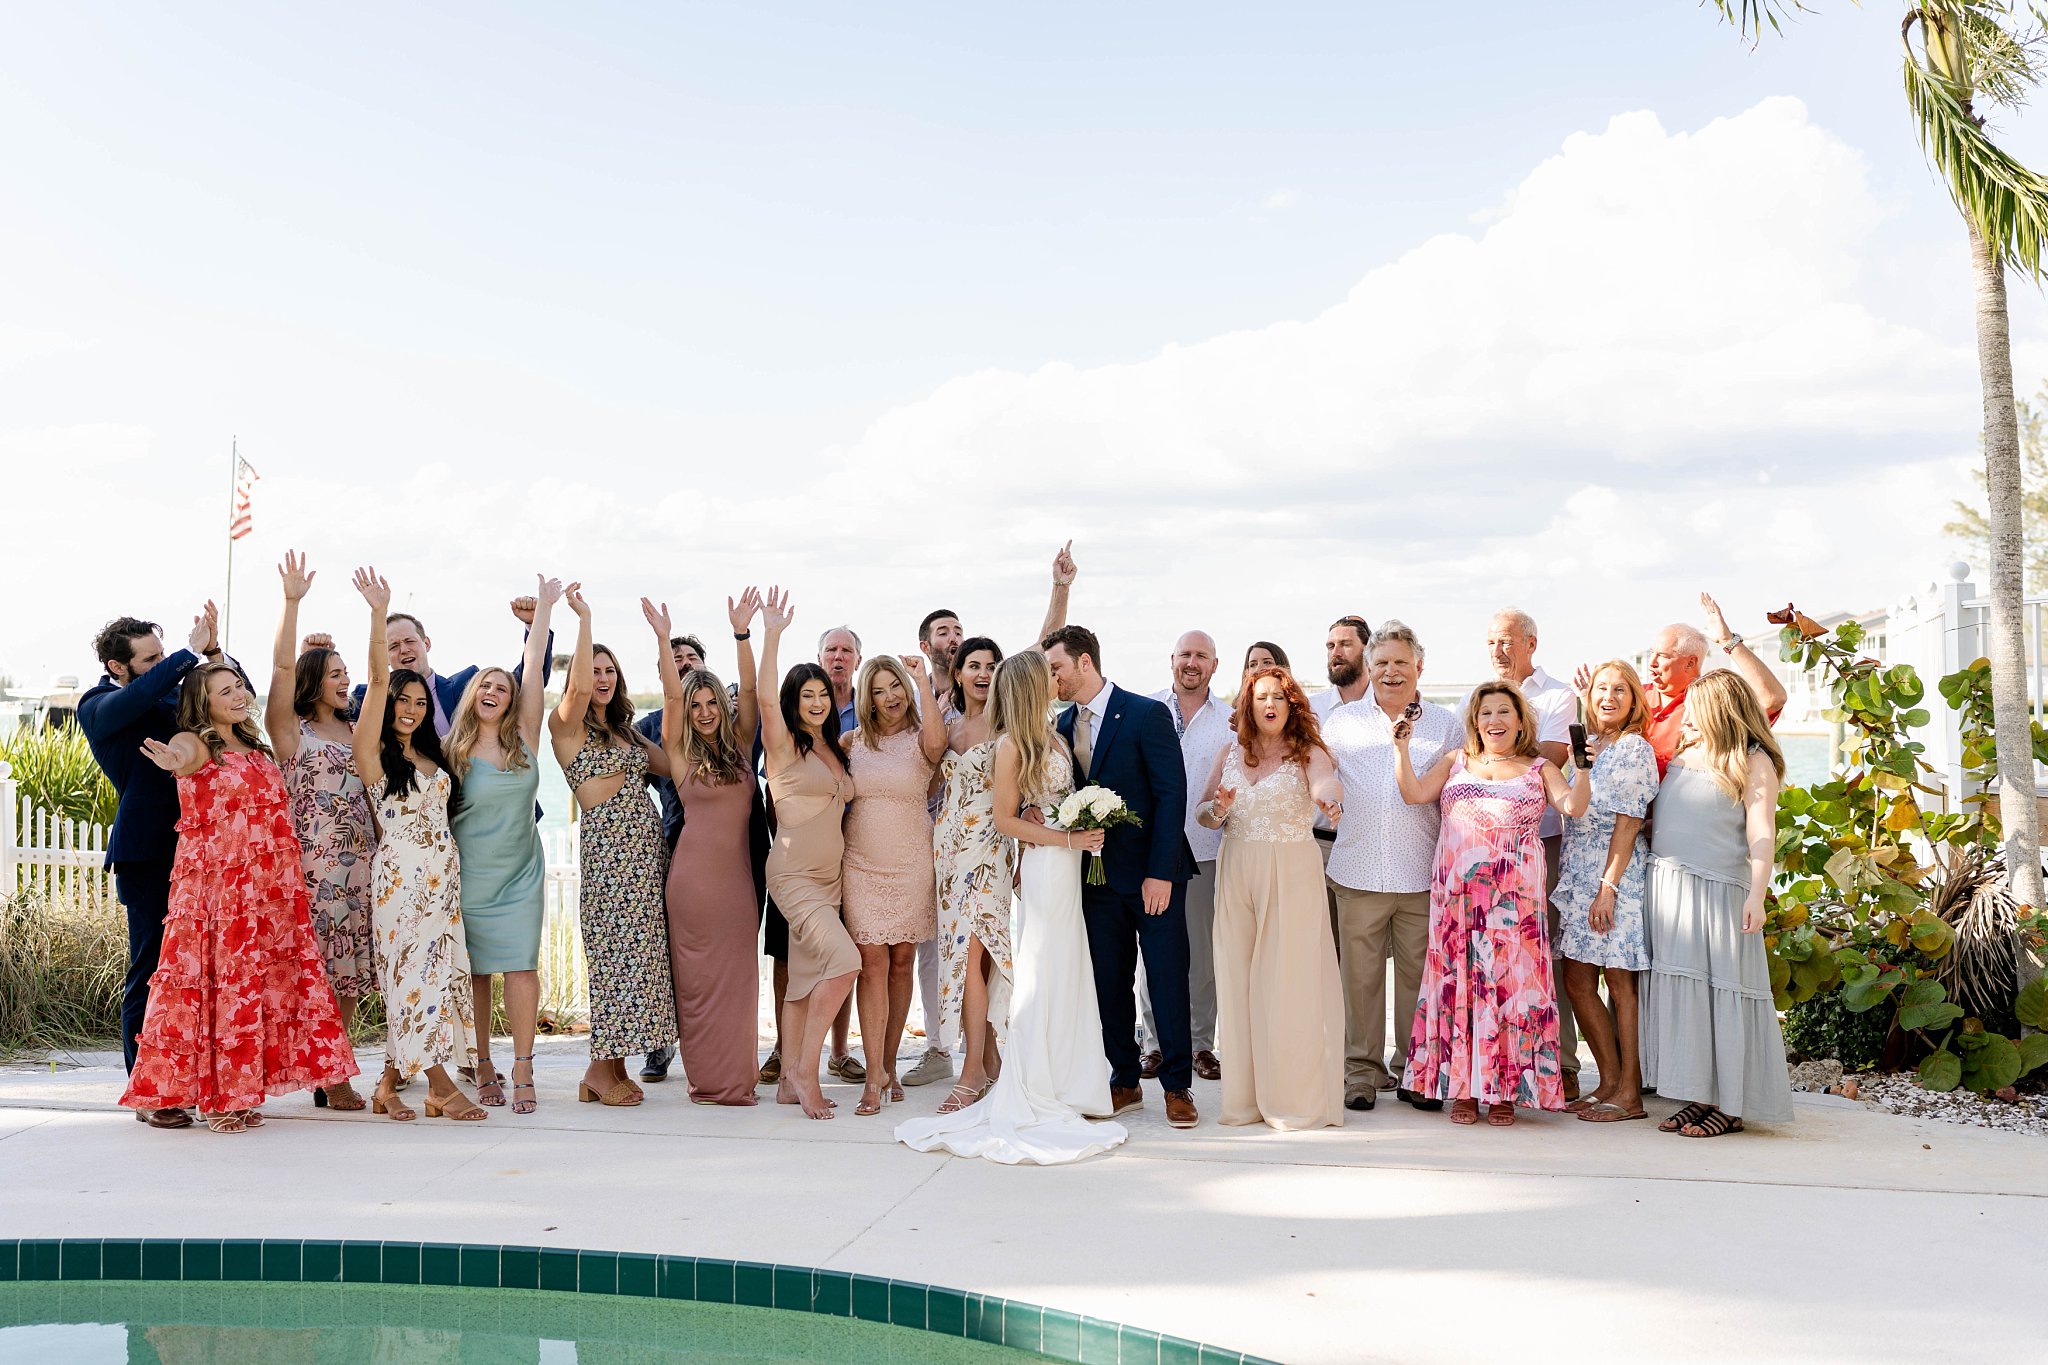 Intimate Boca Grande Wedding day photographing all 25 wedding guests